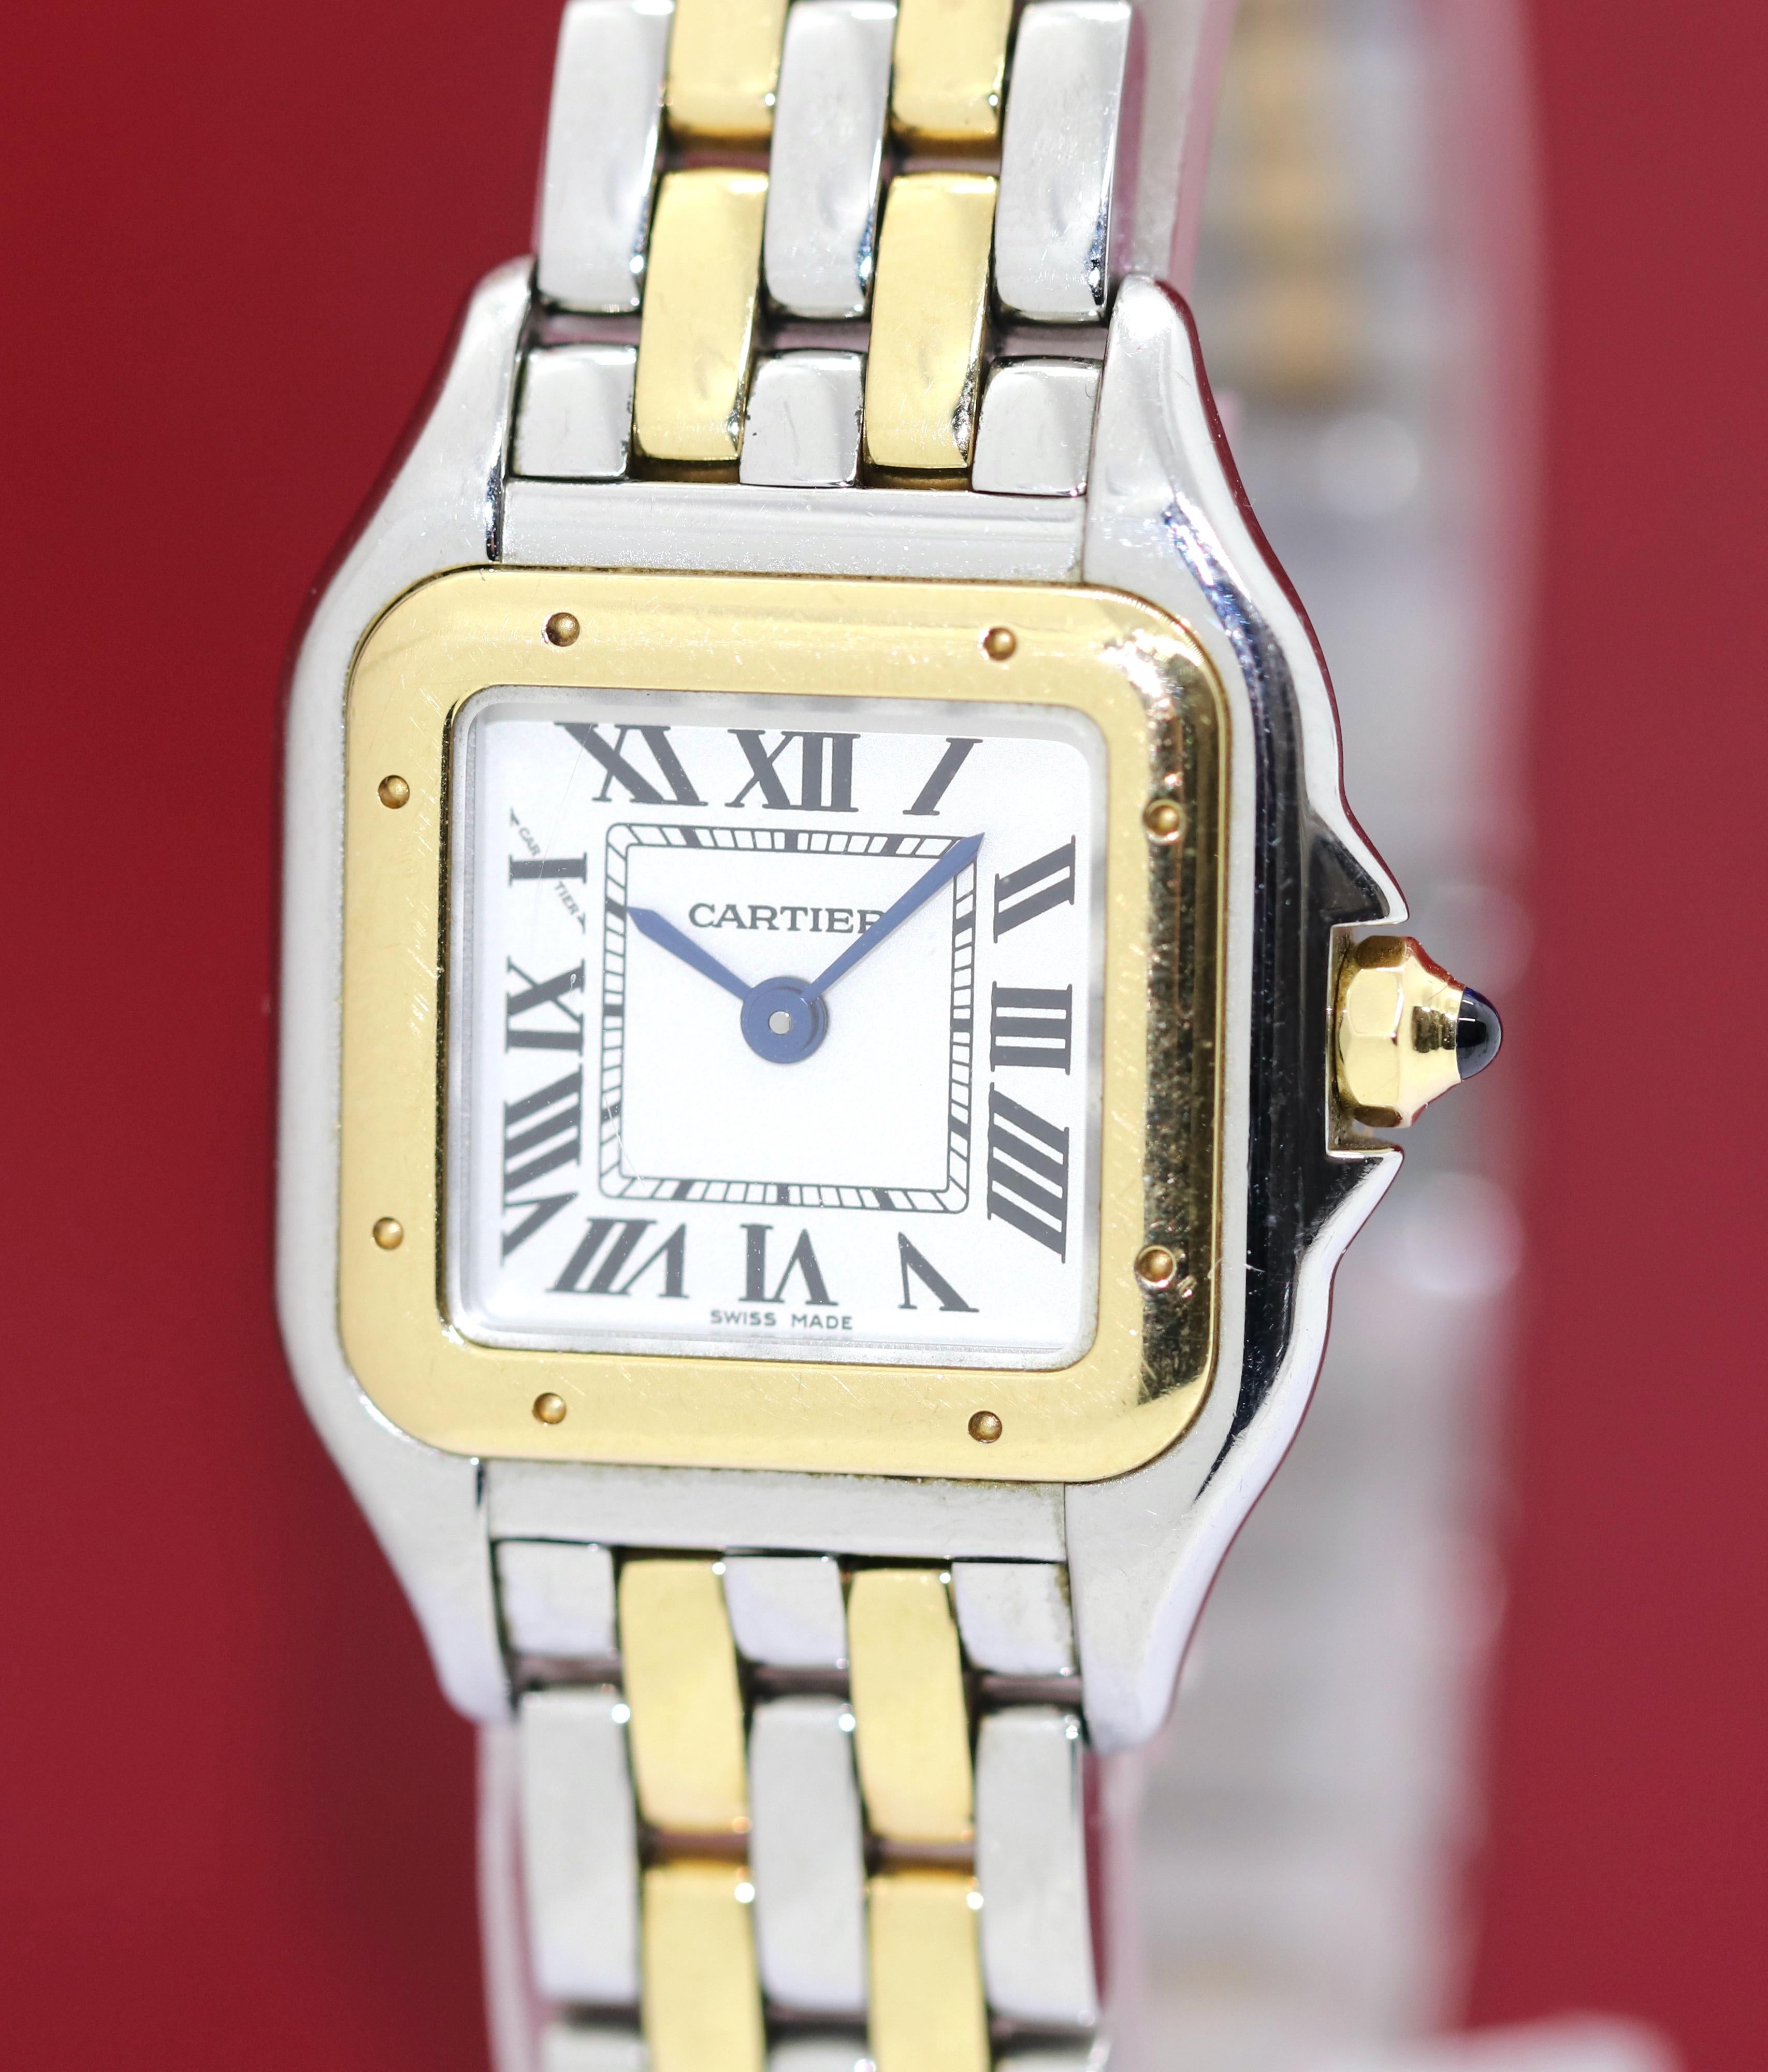 Cartier Panthere Ladies Wrist Watch New Model 18 Karat Gold and Stainless Steel.
Quartz Movement. Case: 22mm (without crown). Model Number W2PN0006. Ref 4023.

Including original Box and certificate of authenticity (from our house).